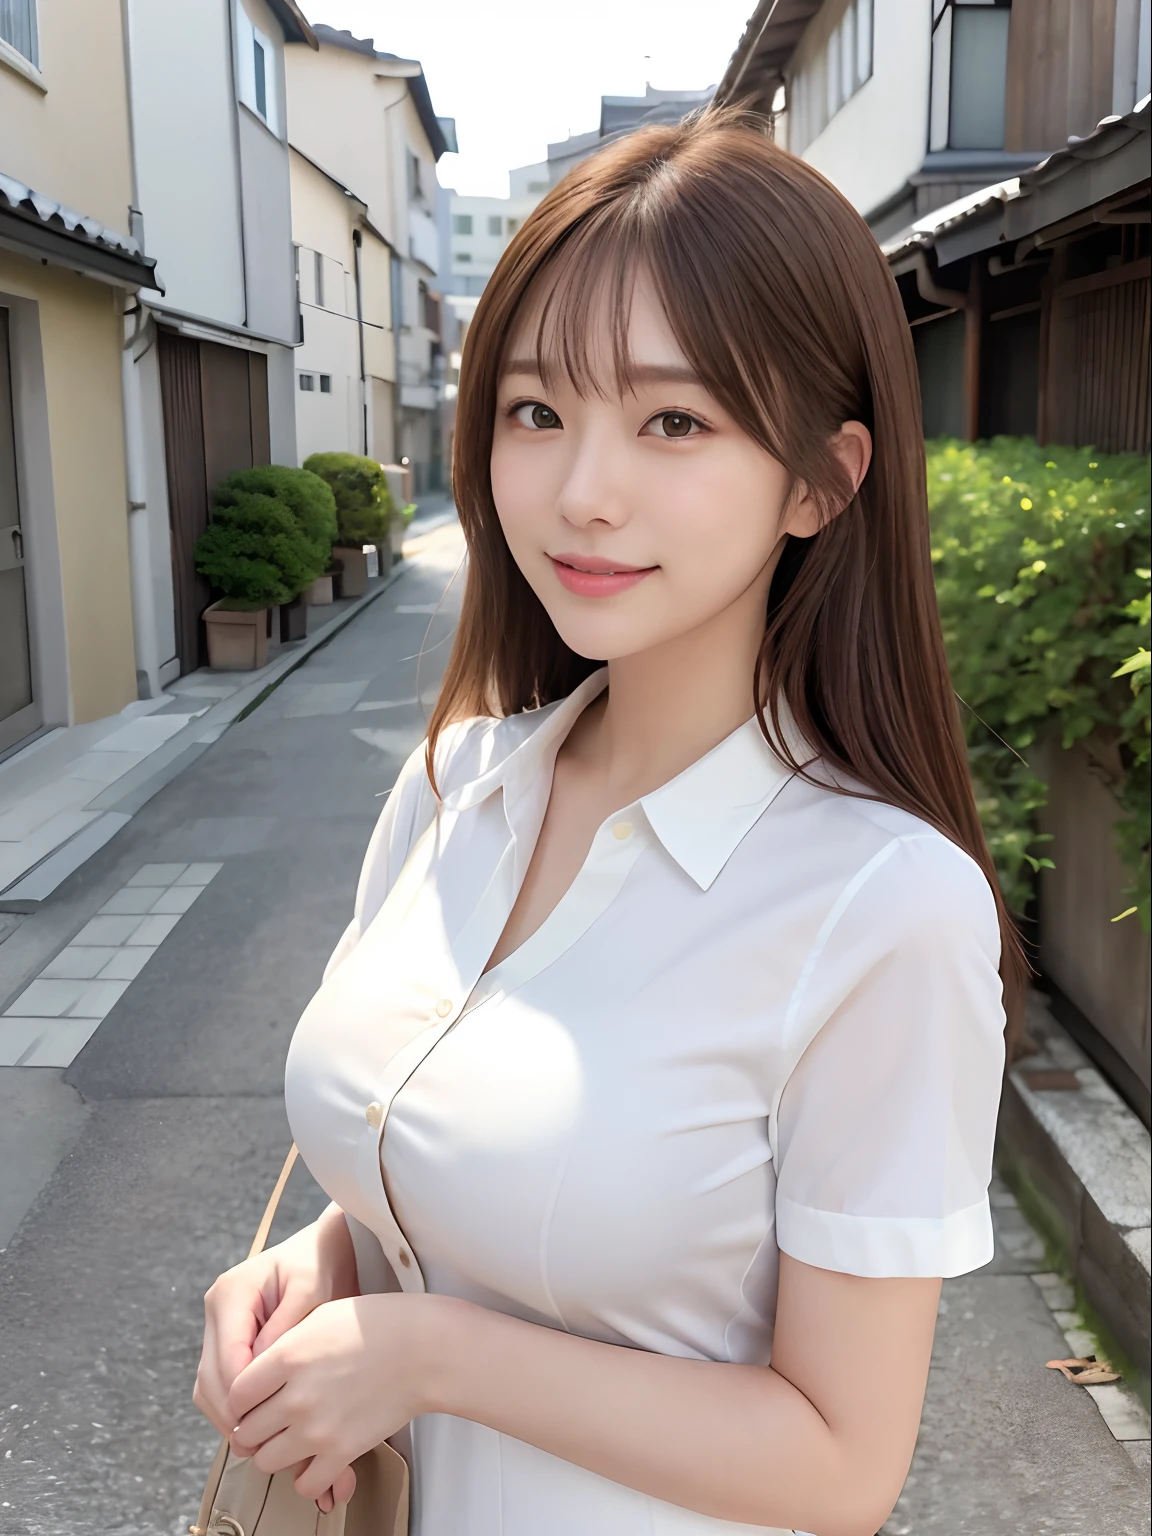 masutepiece、Supreme Beauty、Beautifully shaped breasts、​masterpiece, 1 girl, solo、White shirt、suits、detail, depth of fields, 135 mm, Textured skin, Super Detail, High quality, awardwinning, Best Quality, hight resolution, 8K, white-skinned,Koi brown hair、Random Hair、cute  face、A big smile、Adult beauties、25-years old、1 person per Japan、Top image quality、Ultra-high resolution、8K、Bright sunshine、Delicate Photos、Back alley、Realistic background